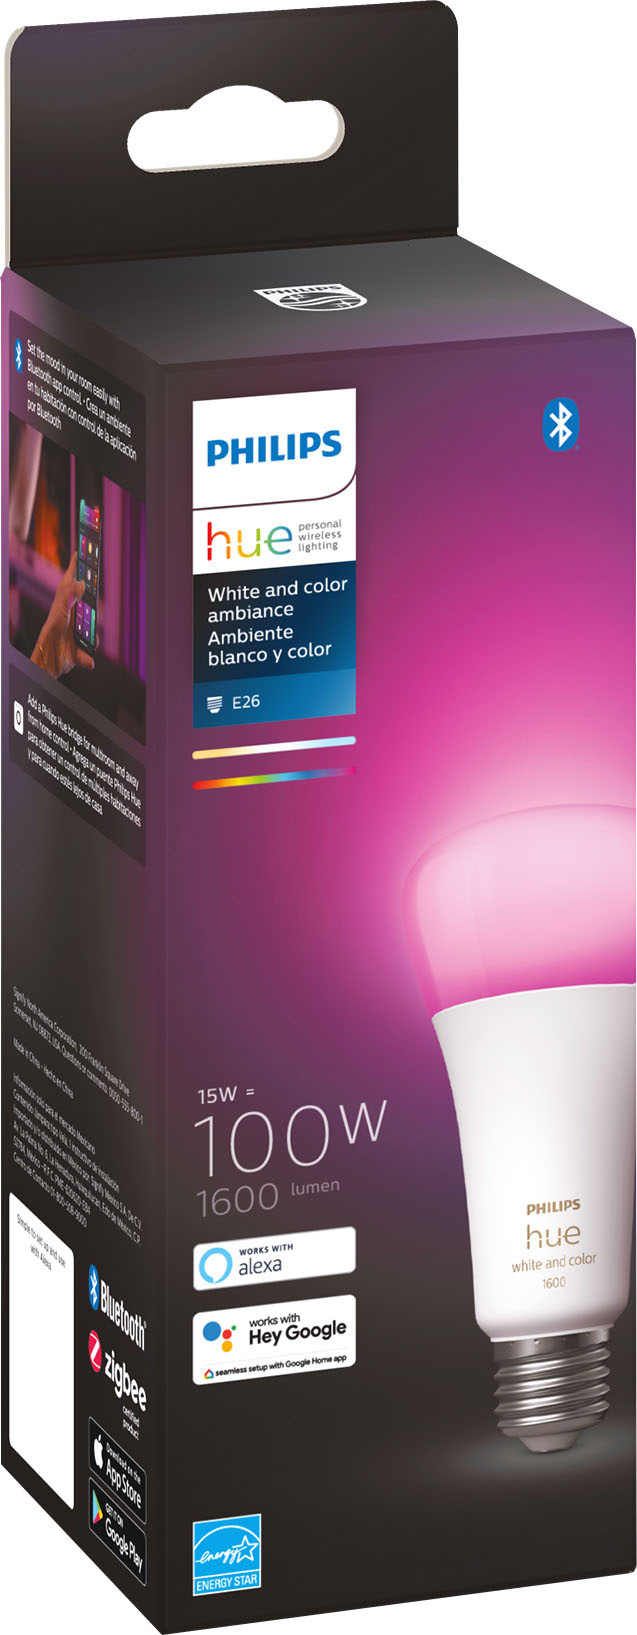 Philips Hue A21 100W Dimmable LED Smart Light Bulb - Soft White